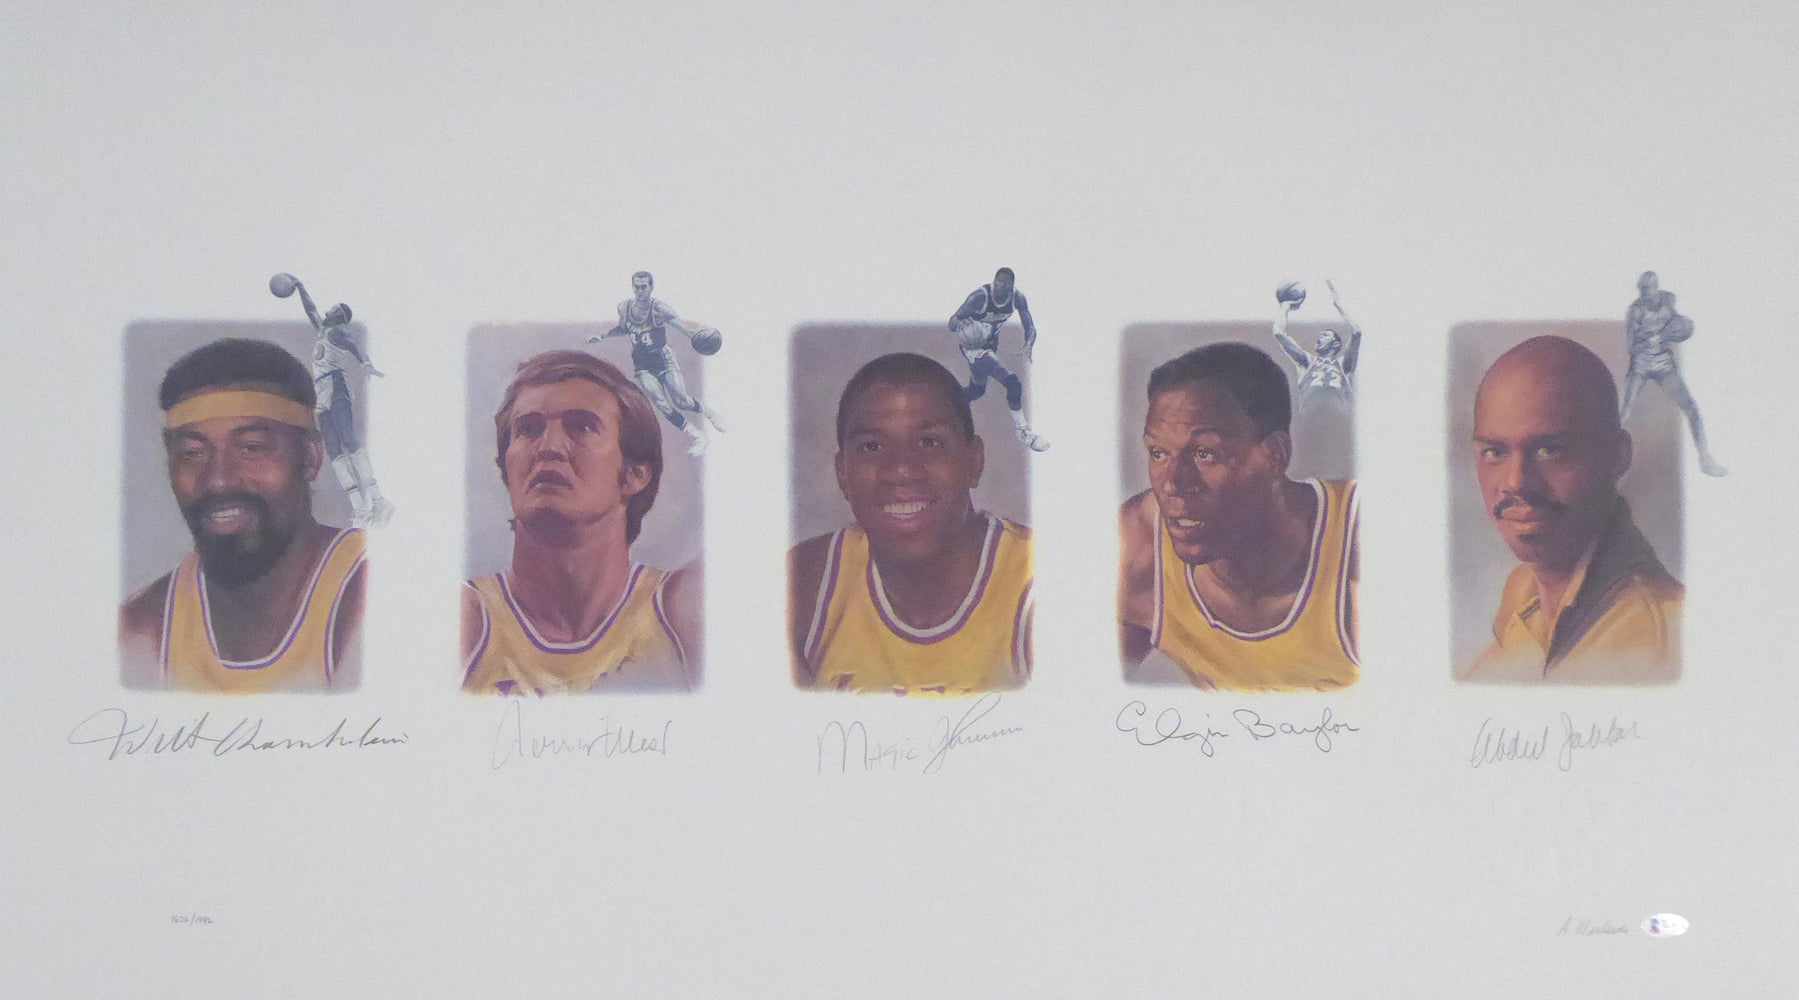 Los Angeles Lakers Legends Autographed Lithograph With 5 Signatures Including Wilt Chamberlain, West, Johnson, Baylor & Abdul-Jabbar #/1992 Beckett BAS Stock #195250 - RSA